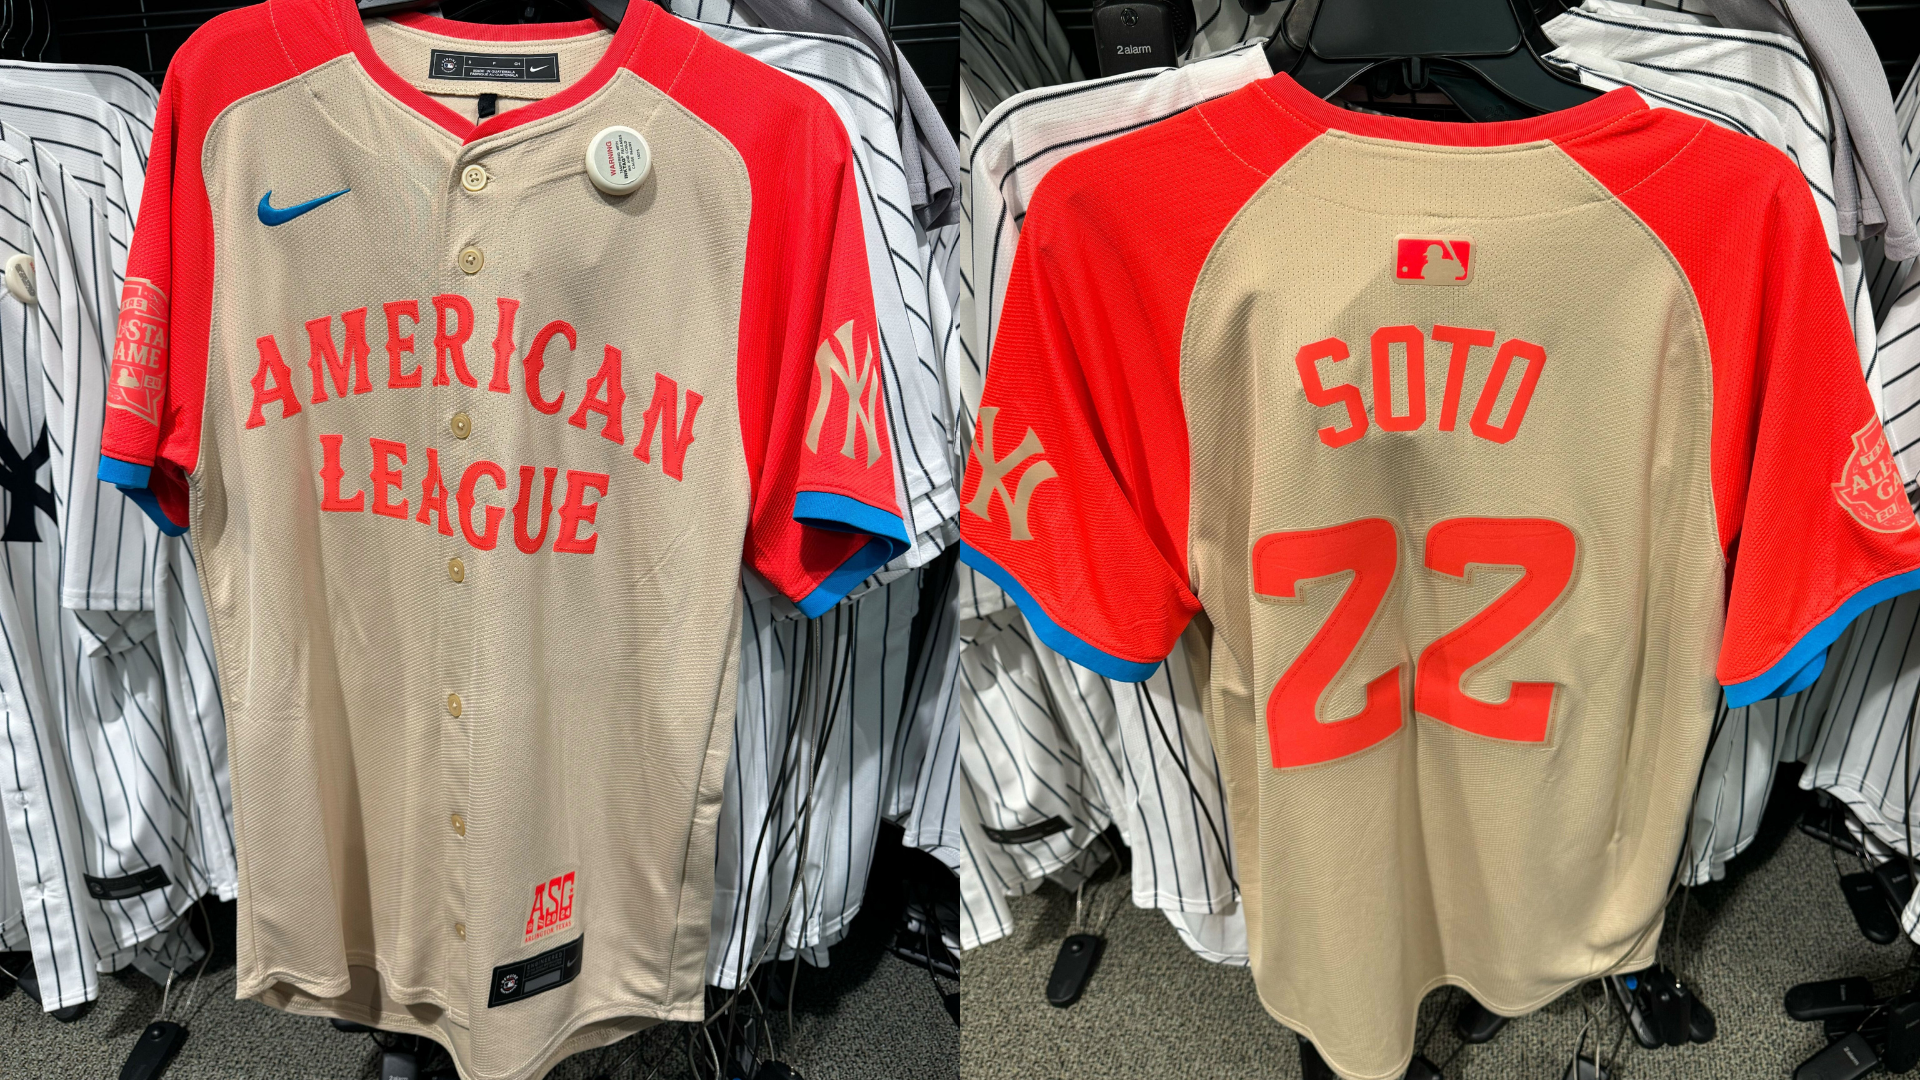 Fans Call For Traditional Team Uniforms After Leaked American League All-Star Jerseys Disappoint